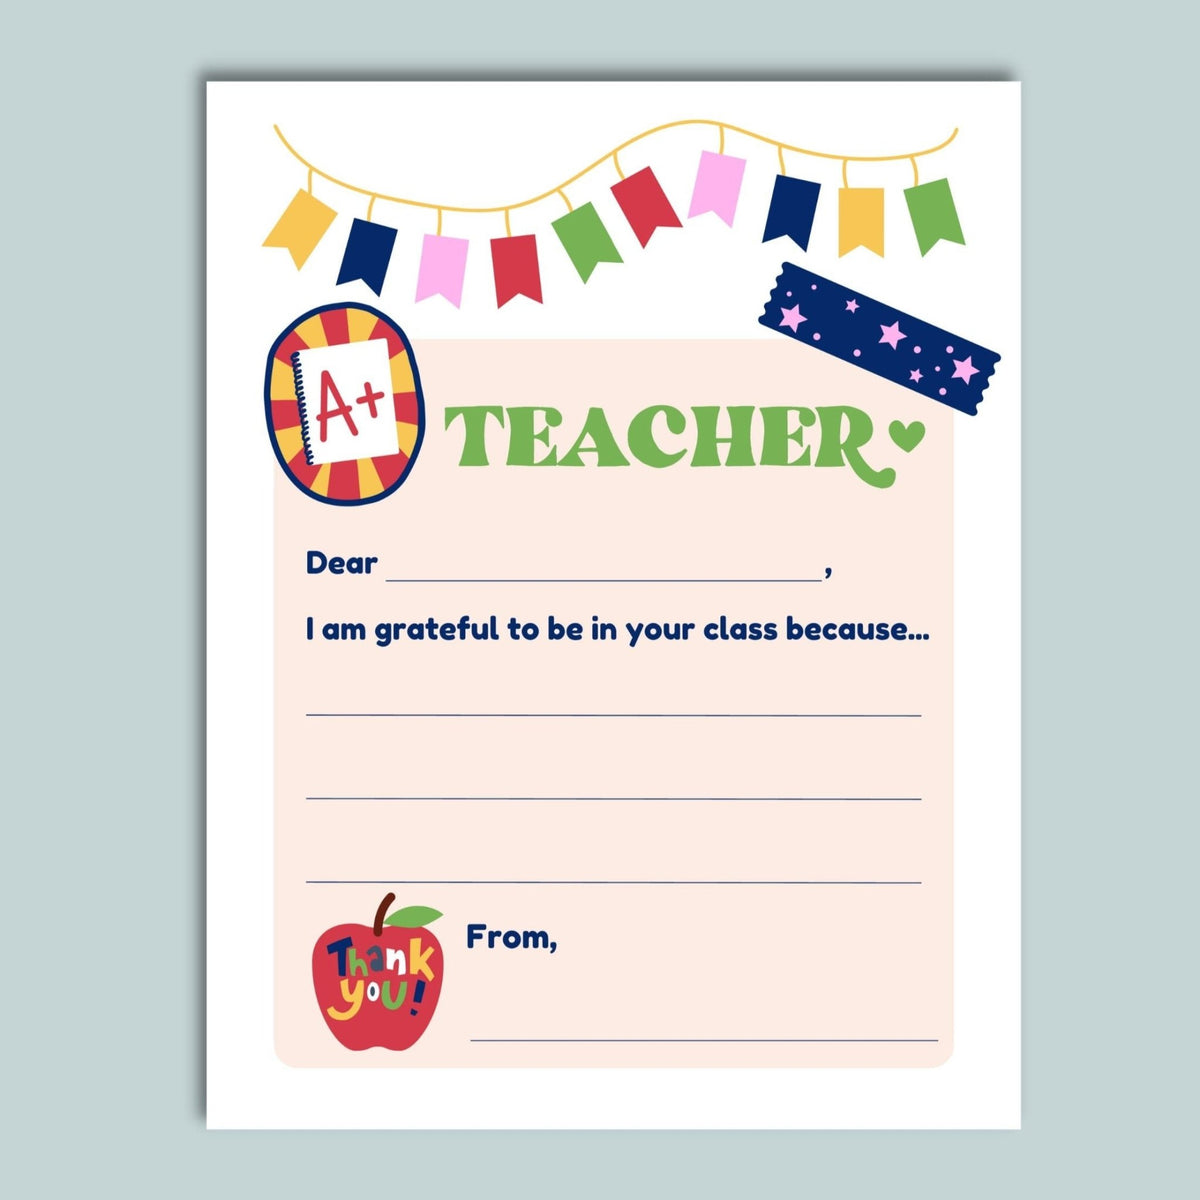 Thank You Teacher Letter - Printable Instant Download - The Note House